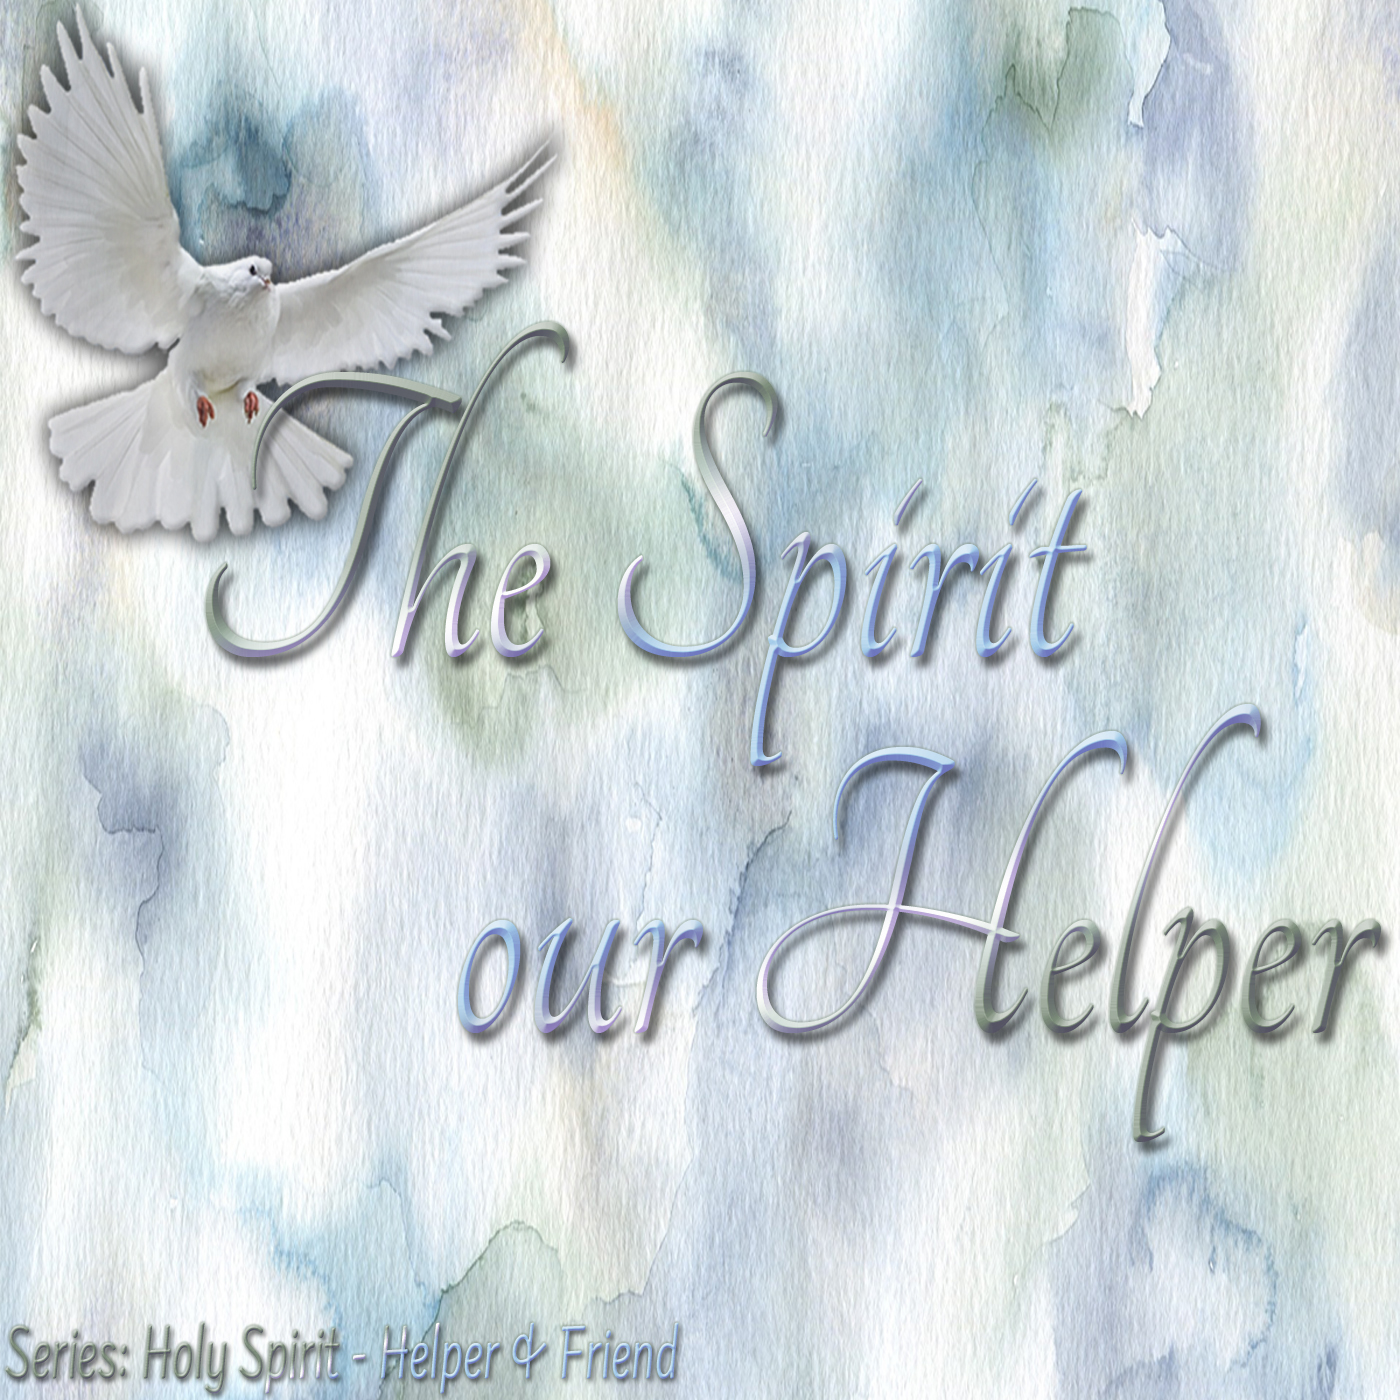 Understanding the Role of the Holy Spirit as our Helper